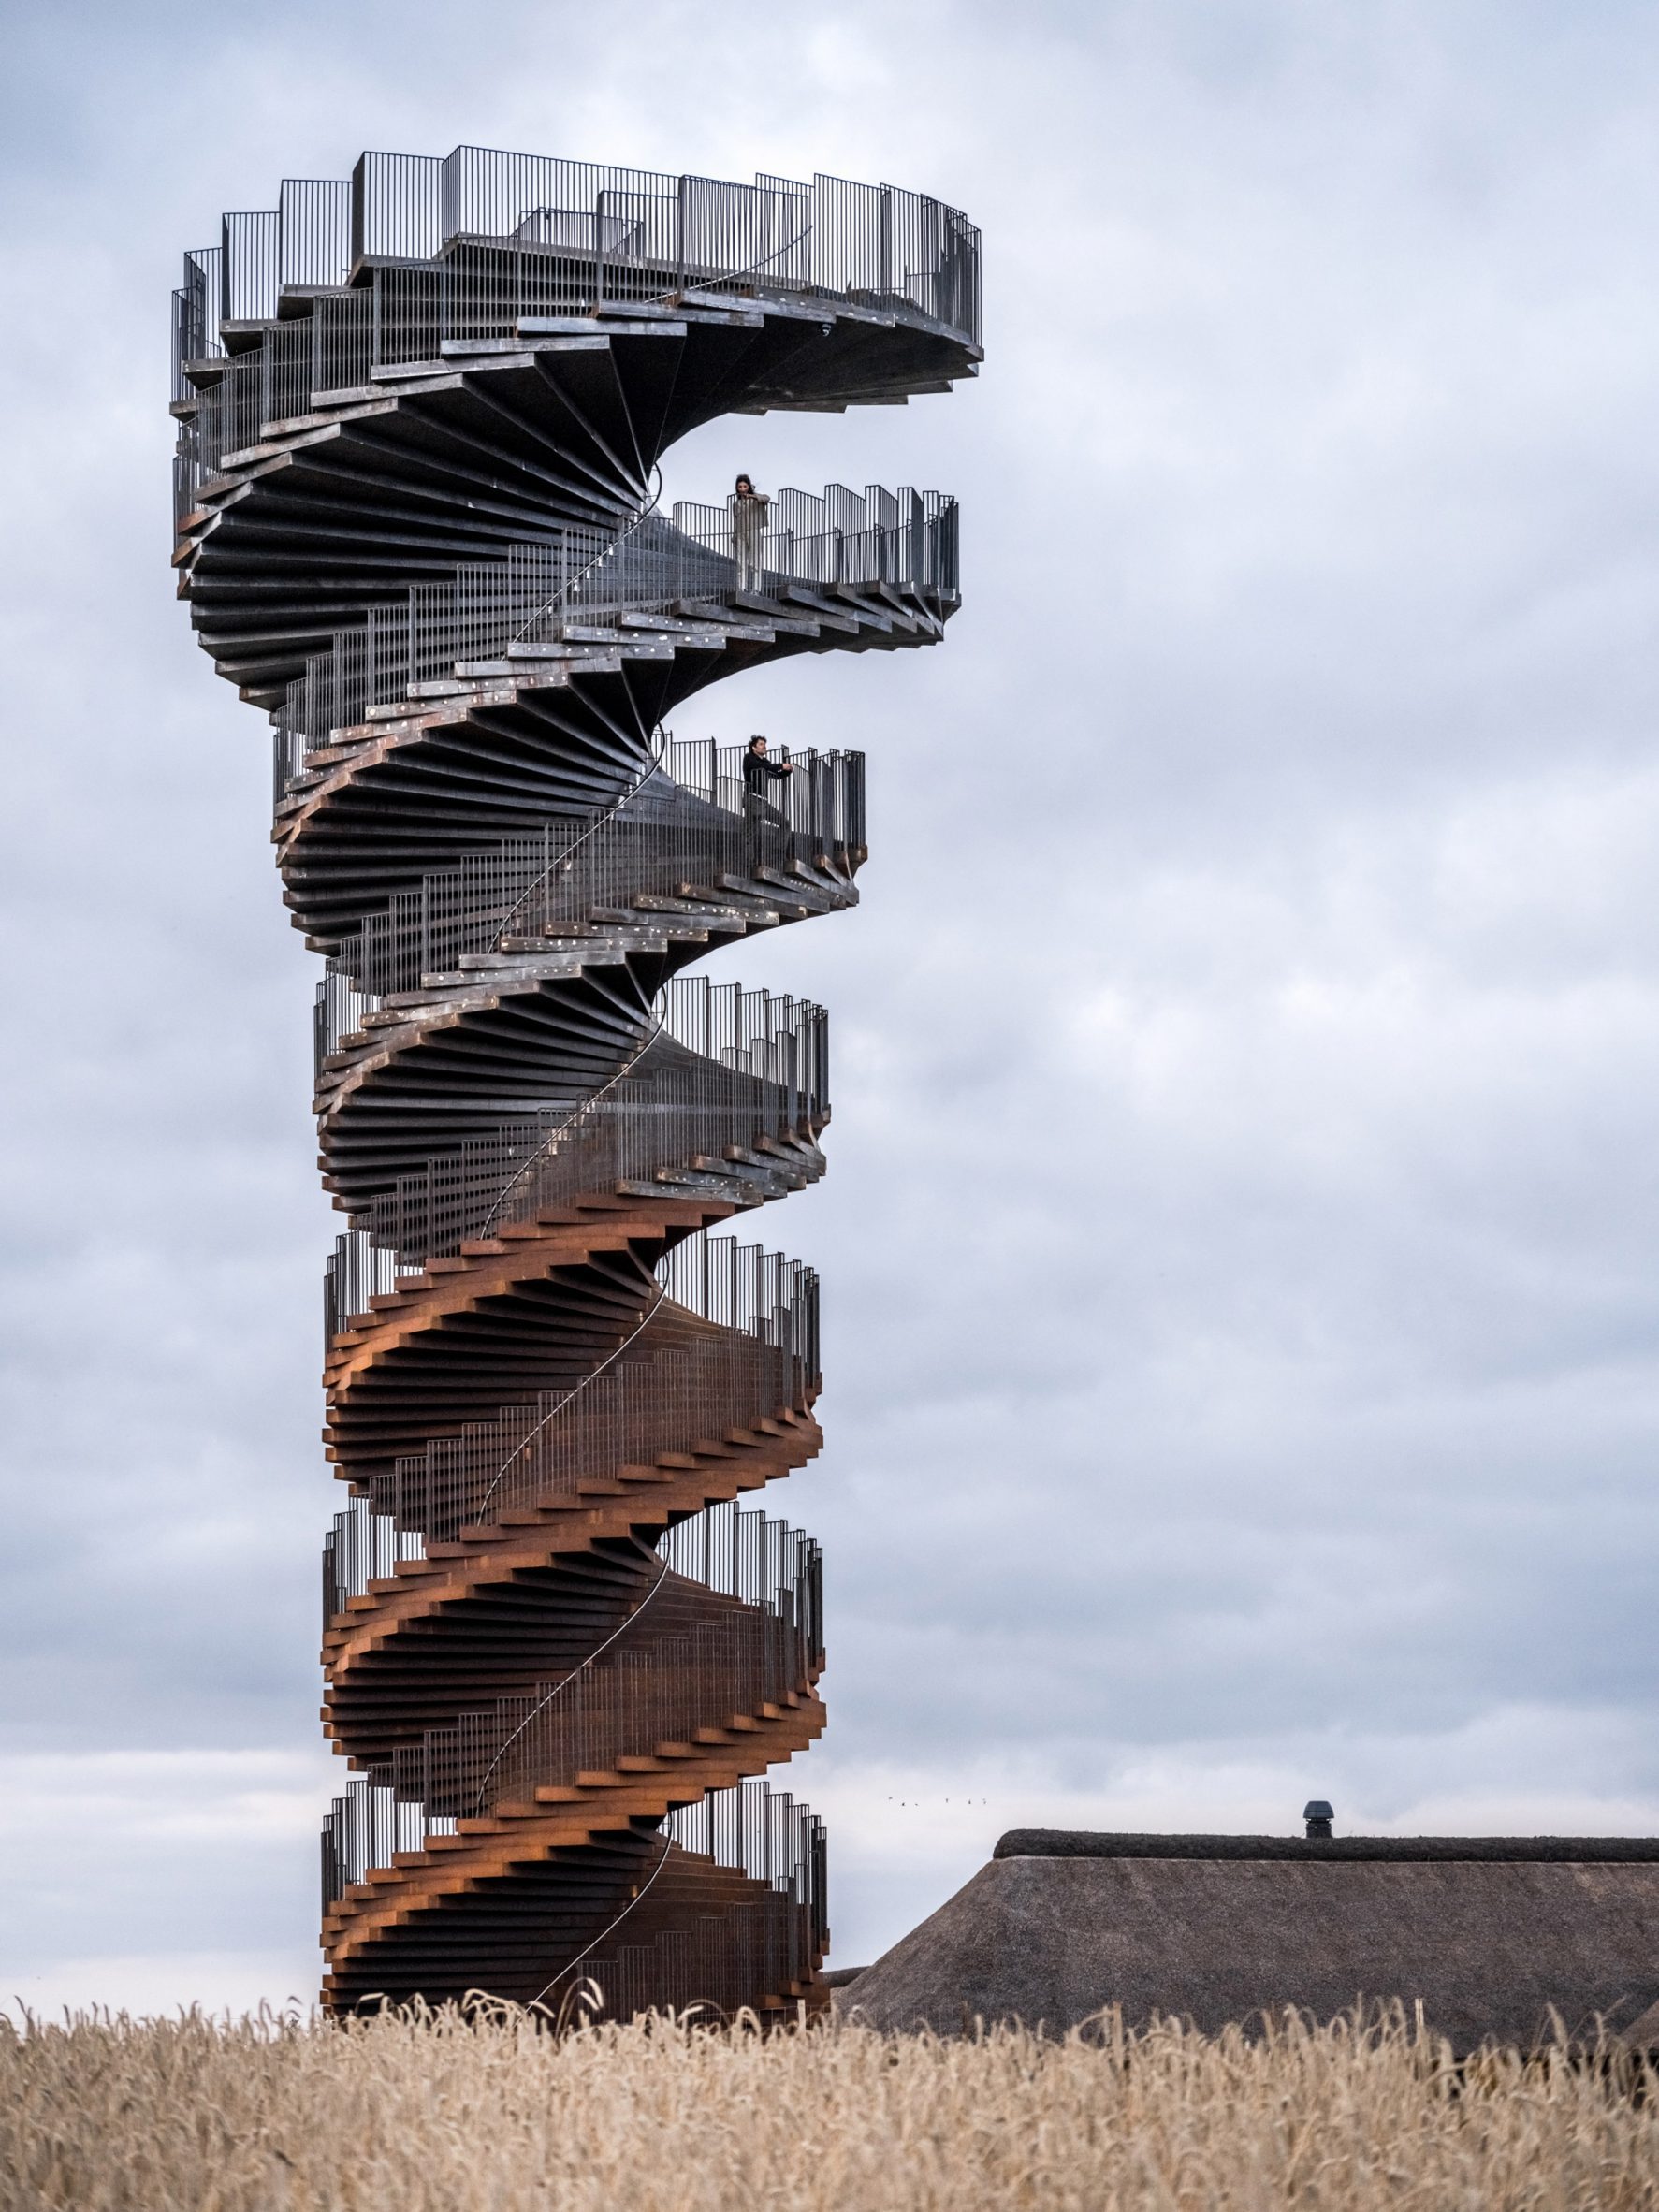 Marsk Tower viewing point in Denmark